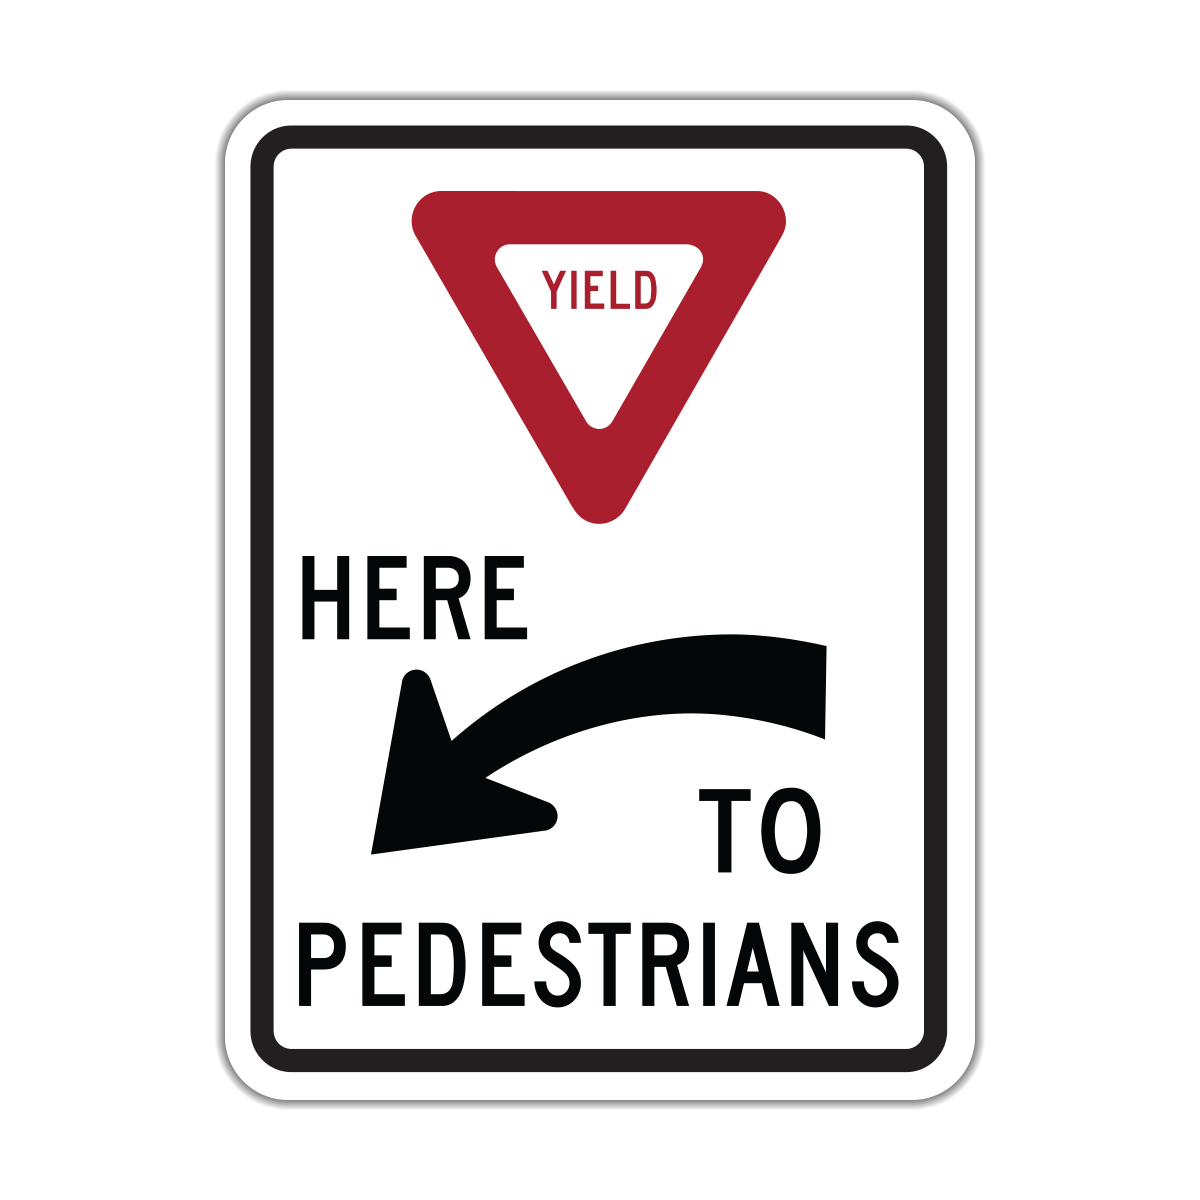 R1-5a Yield Here to Pedestrians